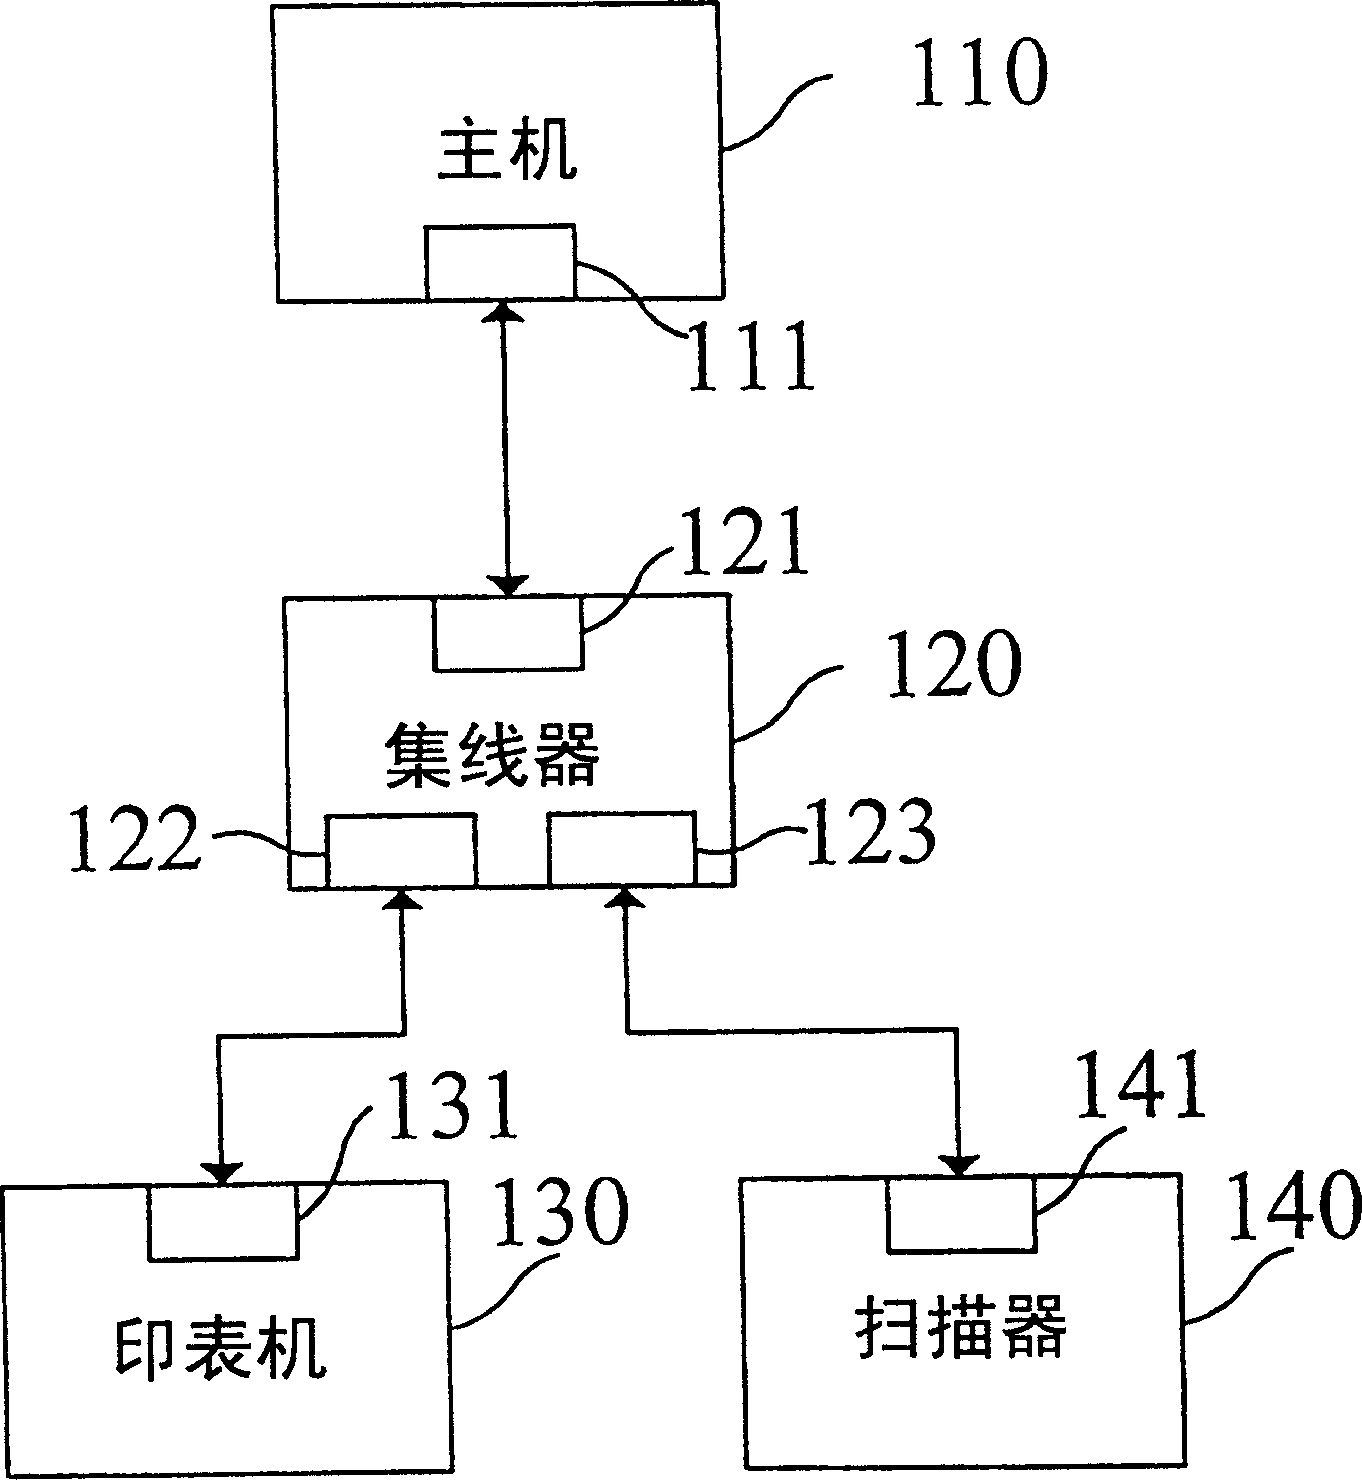 Sequence bus compound apparatus using concentrator connection layer and UTMI interface